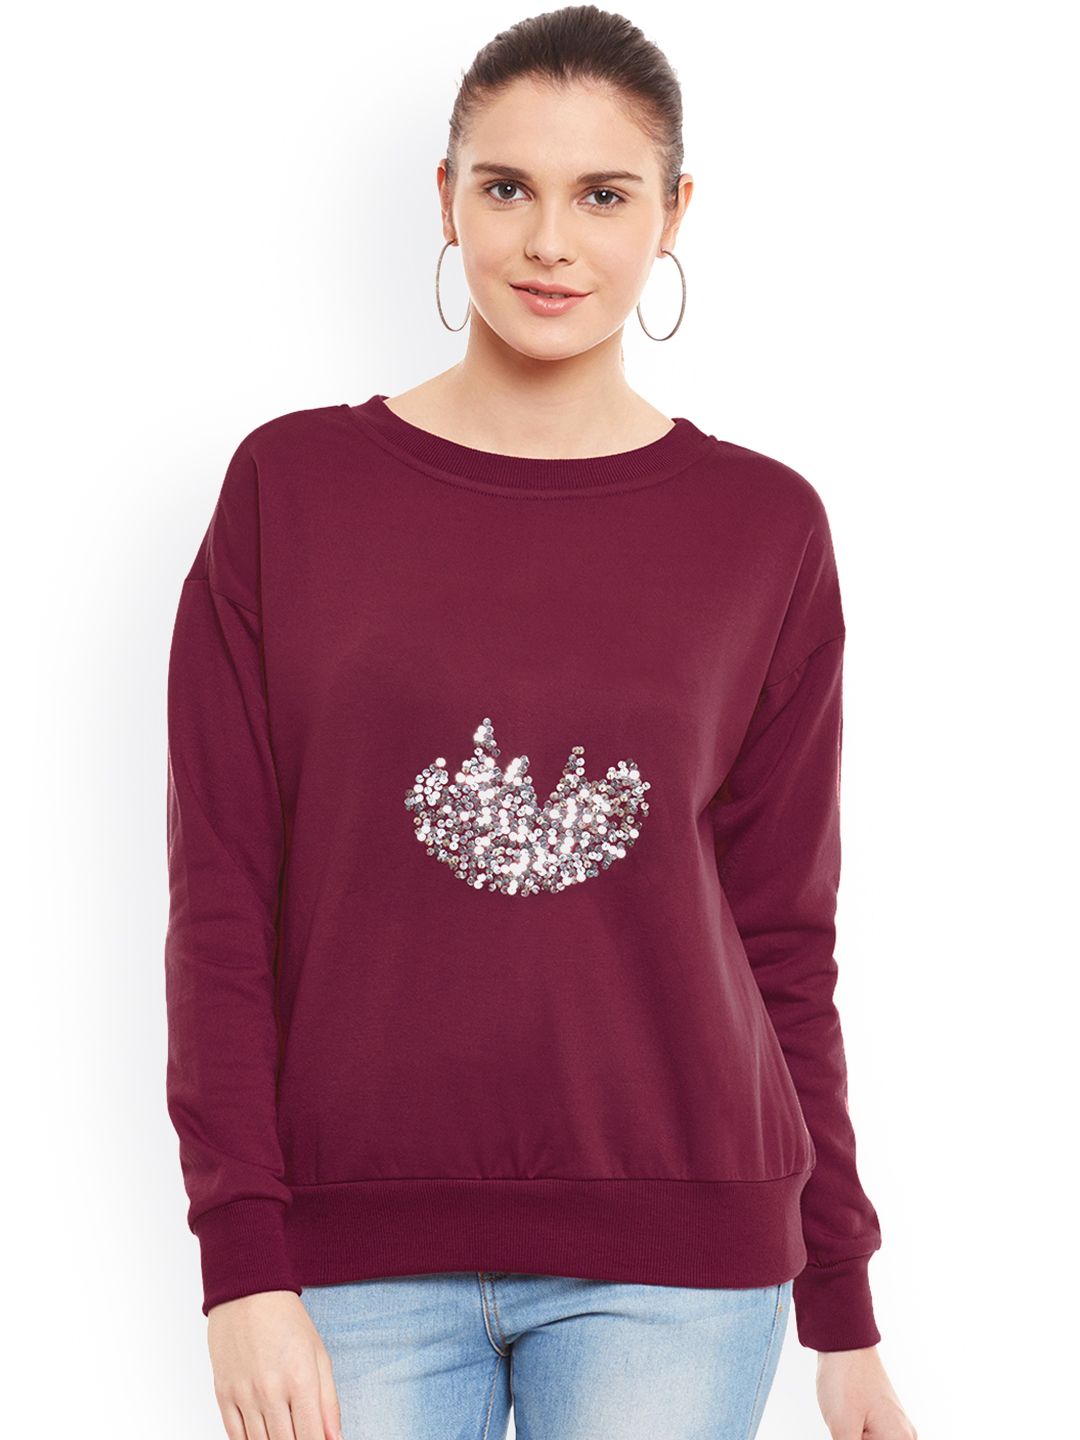 Belle Fille Magenta Sweatshirt with Sequinned Detail Price in India